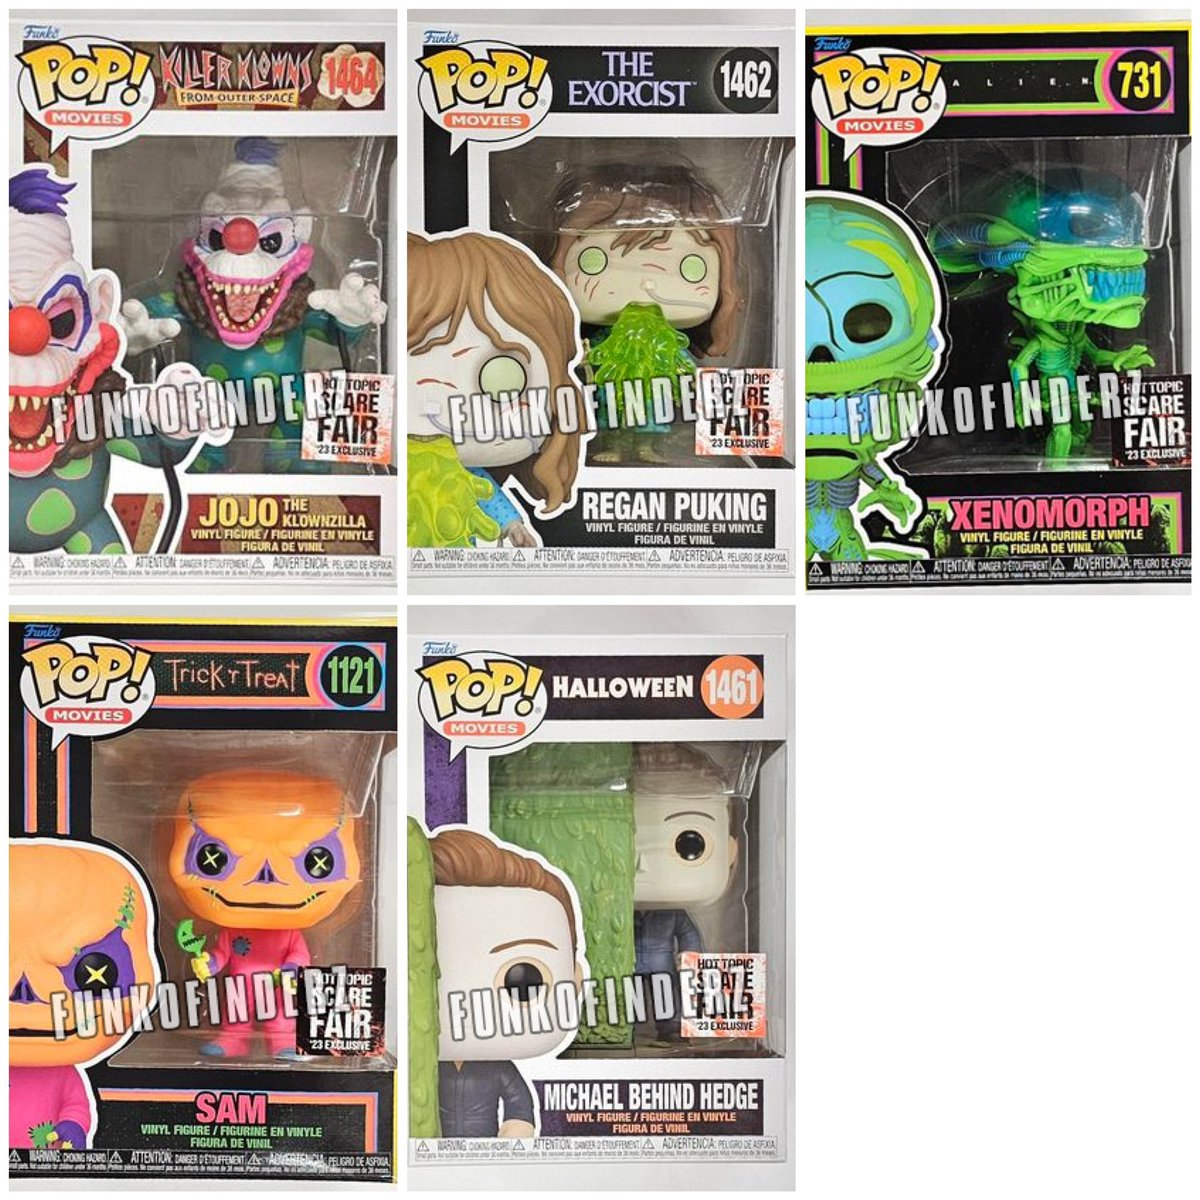 A look at the Hot Topic Scare Fair exclusives. These will be available online and in stores October 13th! #funko #hottopic #theexcorcist #alien #killerklowns #halloween #trickortreat 

📷 @funkofinderz